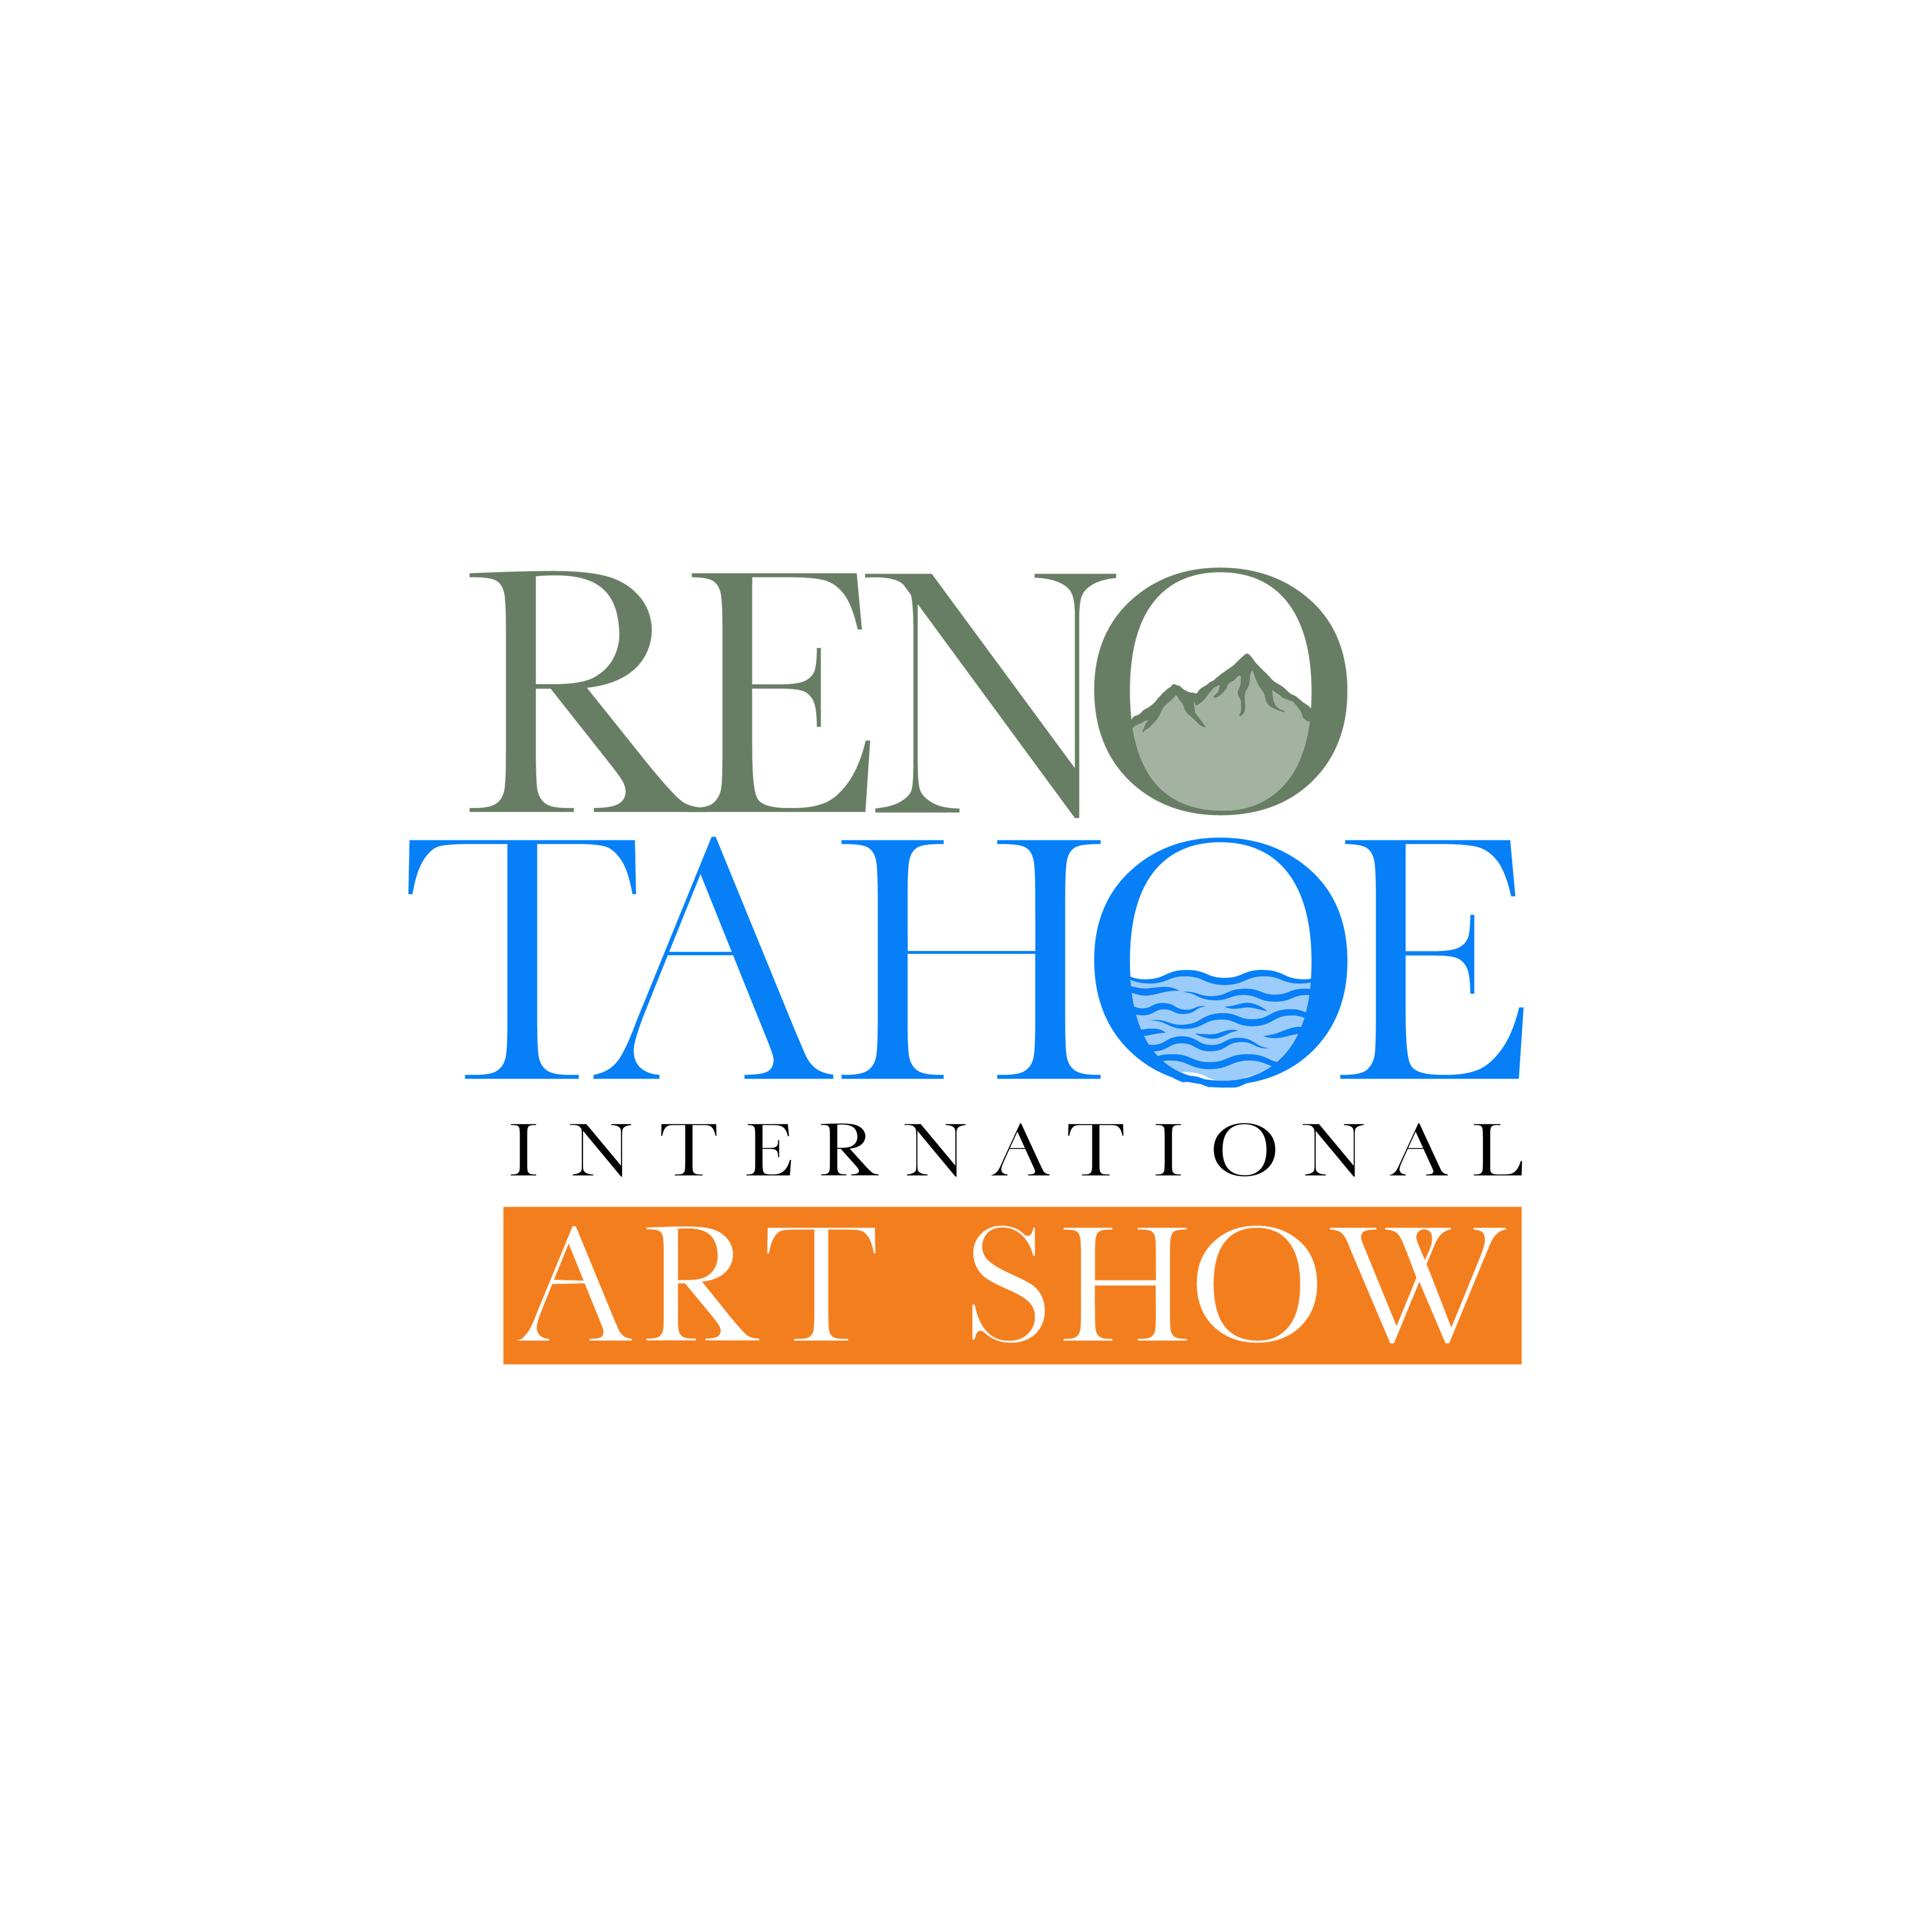 Reno Tahoe moves to national prominence with the launch of a new fine